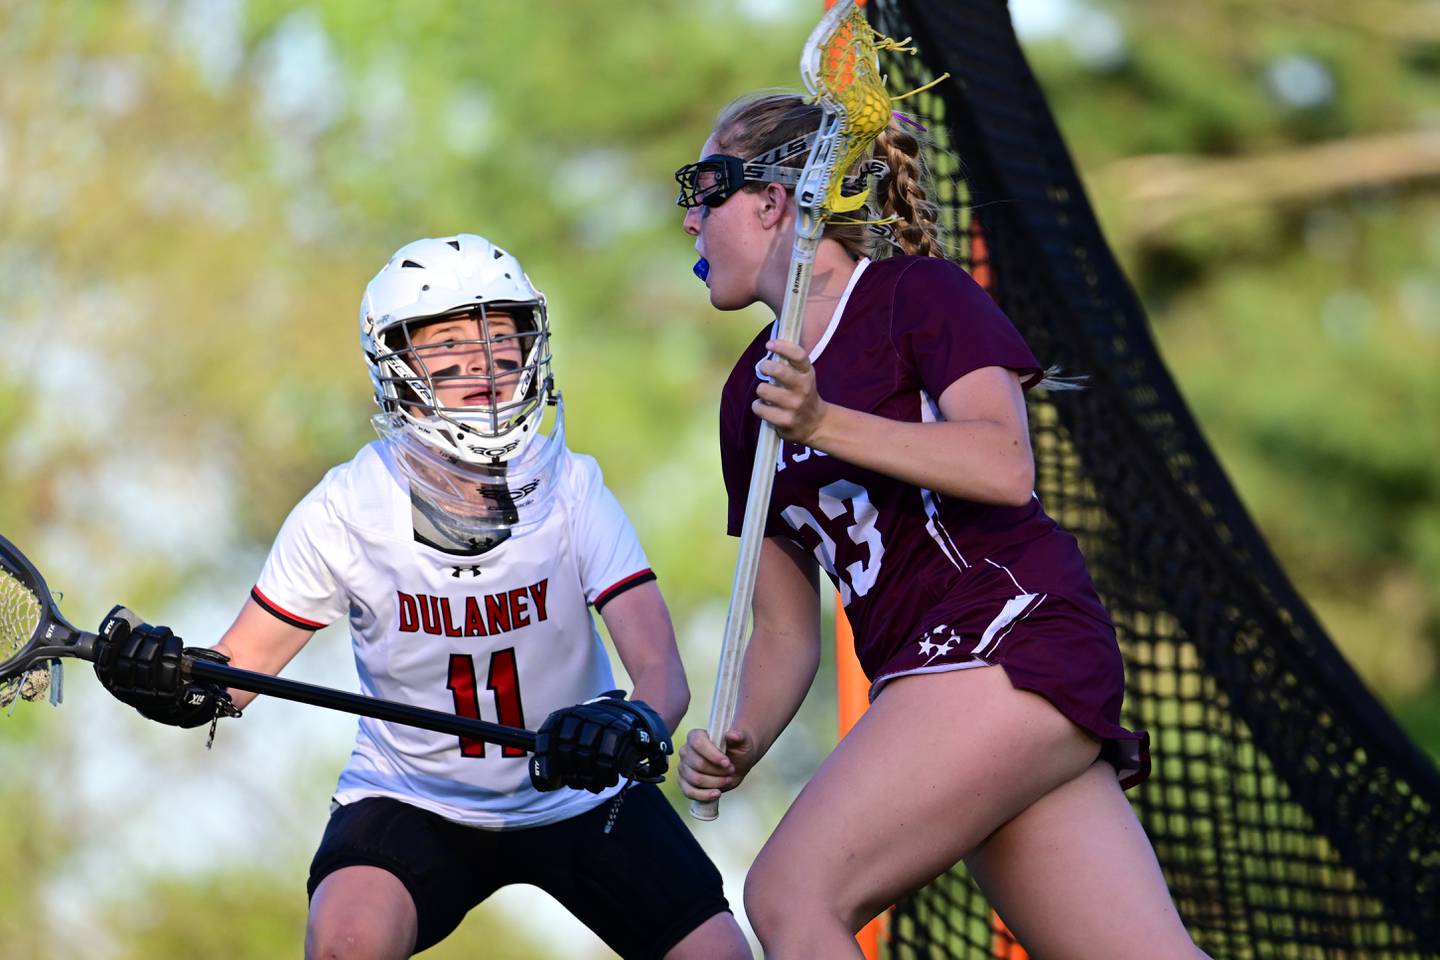 Towson's Chloe Gibson (23) looks for an open teammate while Dulaney goalie Audrey Simoes keeps an eye on her in Wednesday's showdown between two of Baltimore County's top girls lacrosse teams. Gibson had a goal and an assist as No. 15 Towson won, 11-9. Simoes made 10 saves.